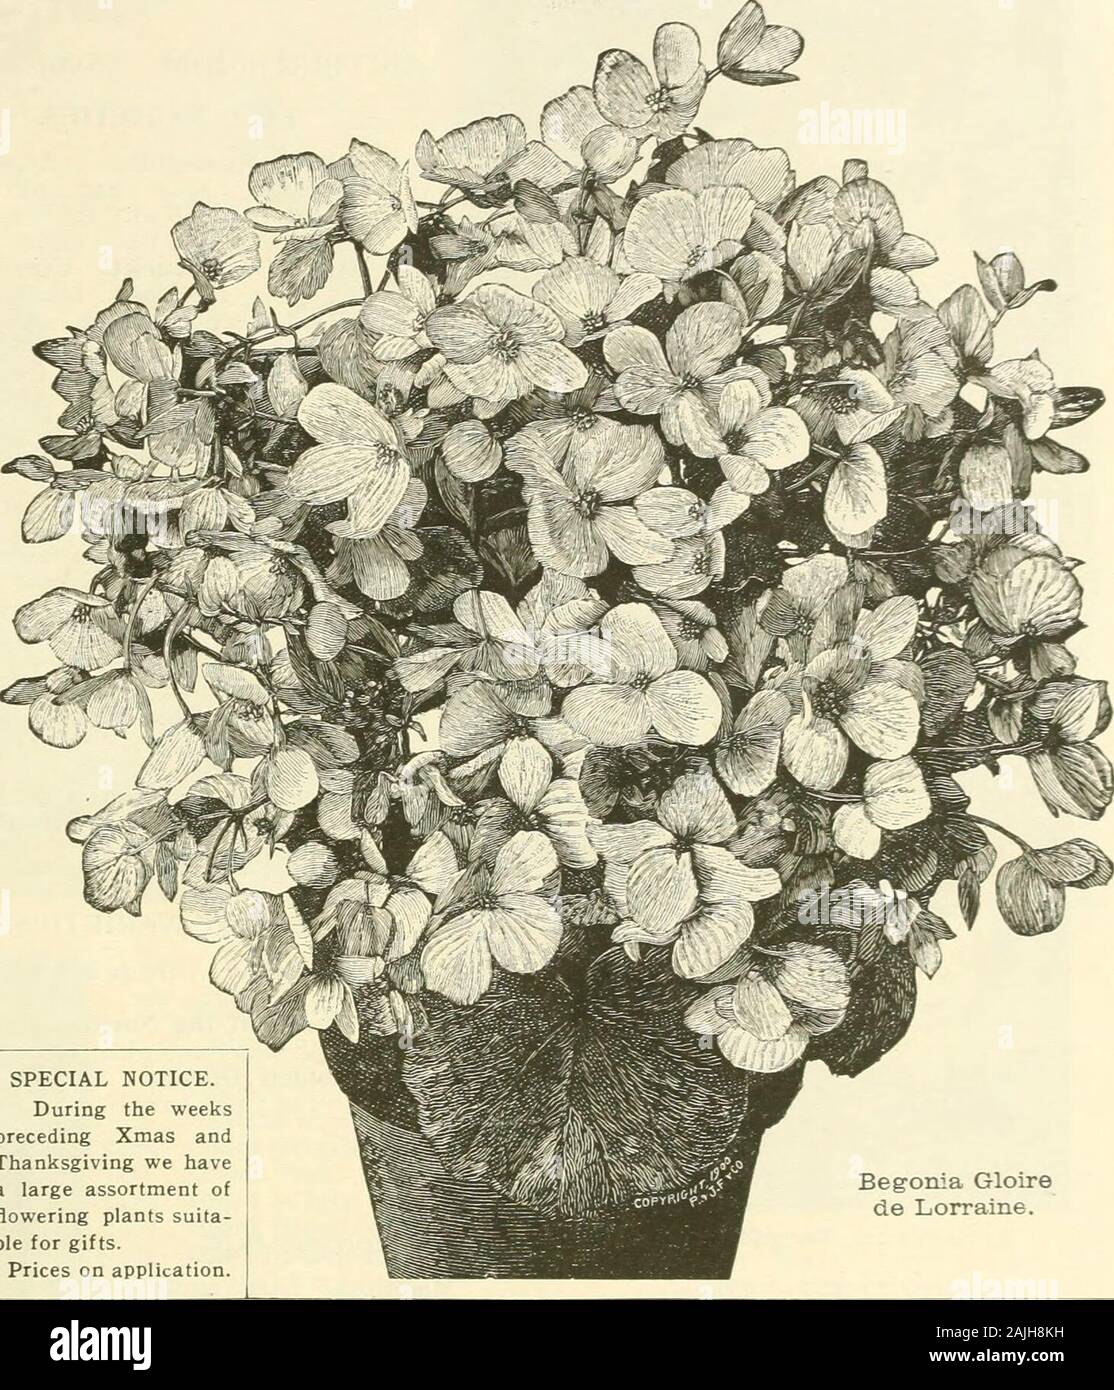 Farquhar's autumn catalogue : 1911 . SPECIAL NOTICE.During the weekspreceding Xmas andThanksgiving we havea large assortment offlowering plants suita-ble for gifts. Prices on application. Begonia Gloirede Lorraine. Eentia Belmoreana. JAPANESEFERN BALLS. IN southern Japan the long rhi-zomes of the beautiful fernDavallia Bullata, are collectedby the country people and woundabout balls of sphagnum moss.These may be started into growthby immersing them in water untilsaturated, then hanging them ina moderately warm temperature.They should be immersed everytwo or three days. They may bedried off and Stock Photo